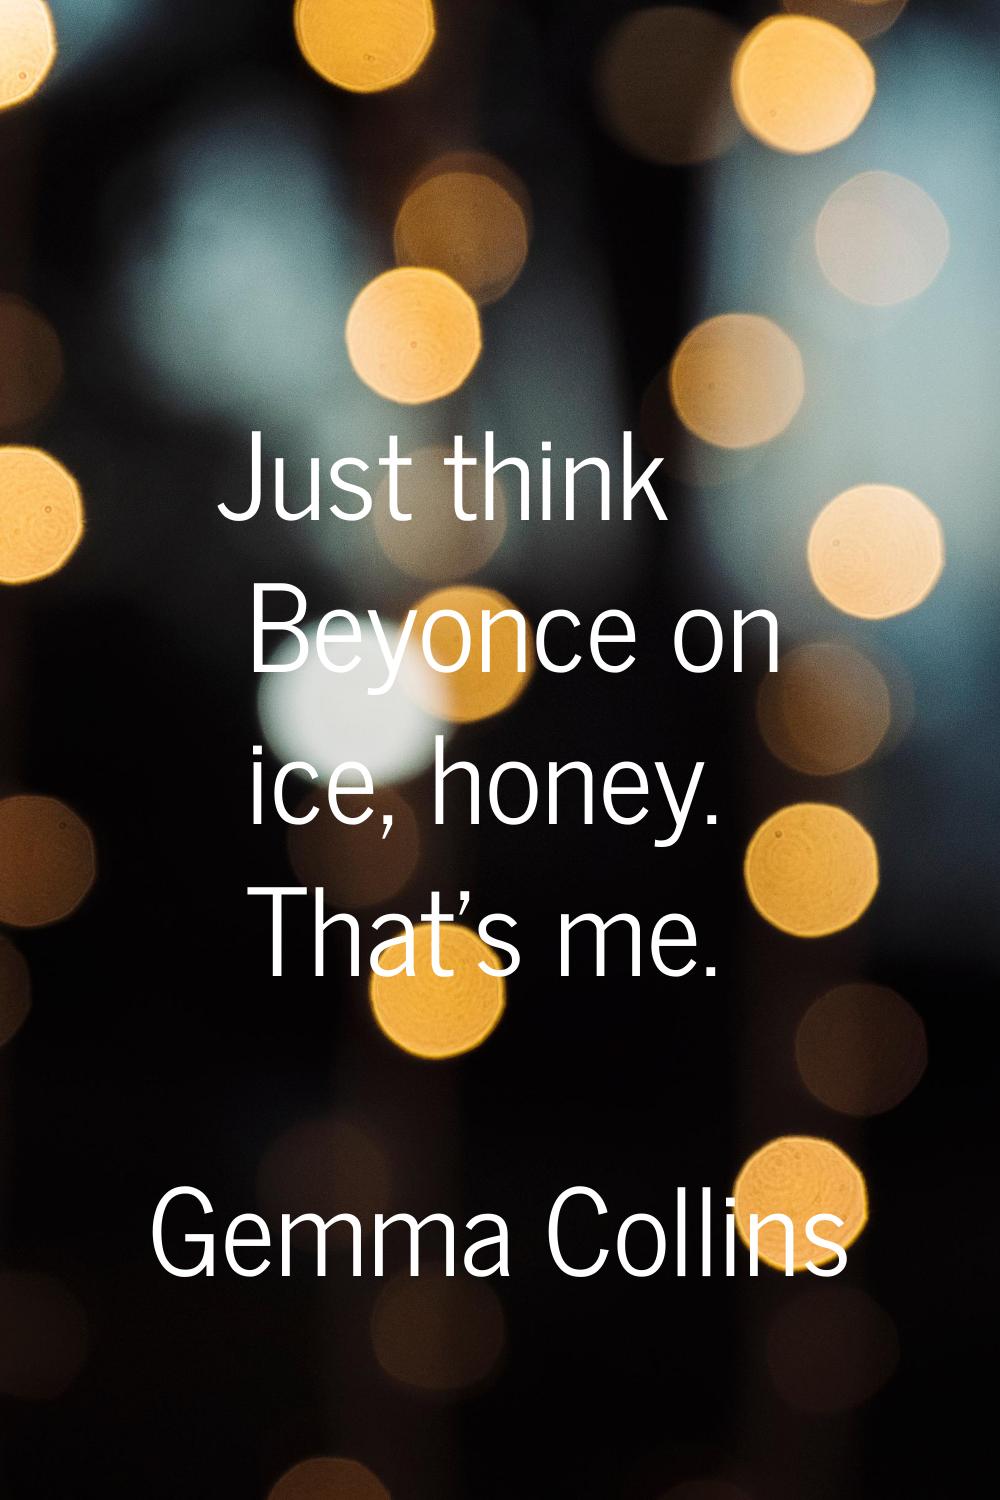 Just think Beyonce on ice, honey. That's me.